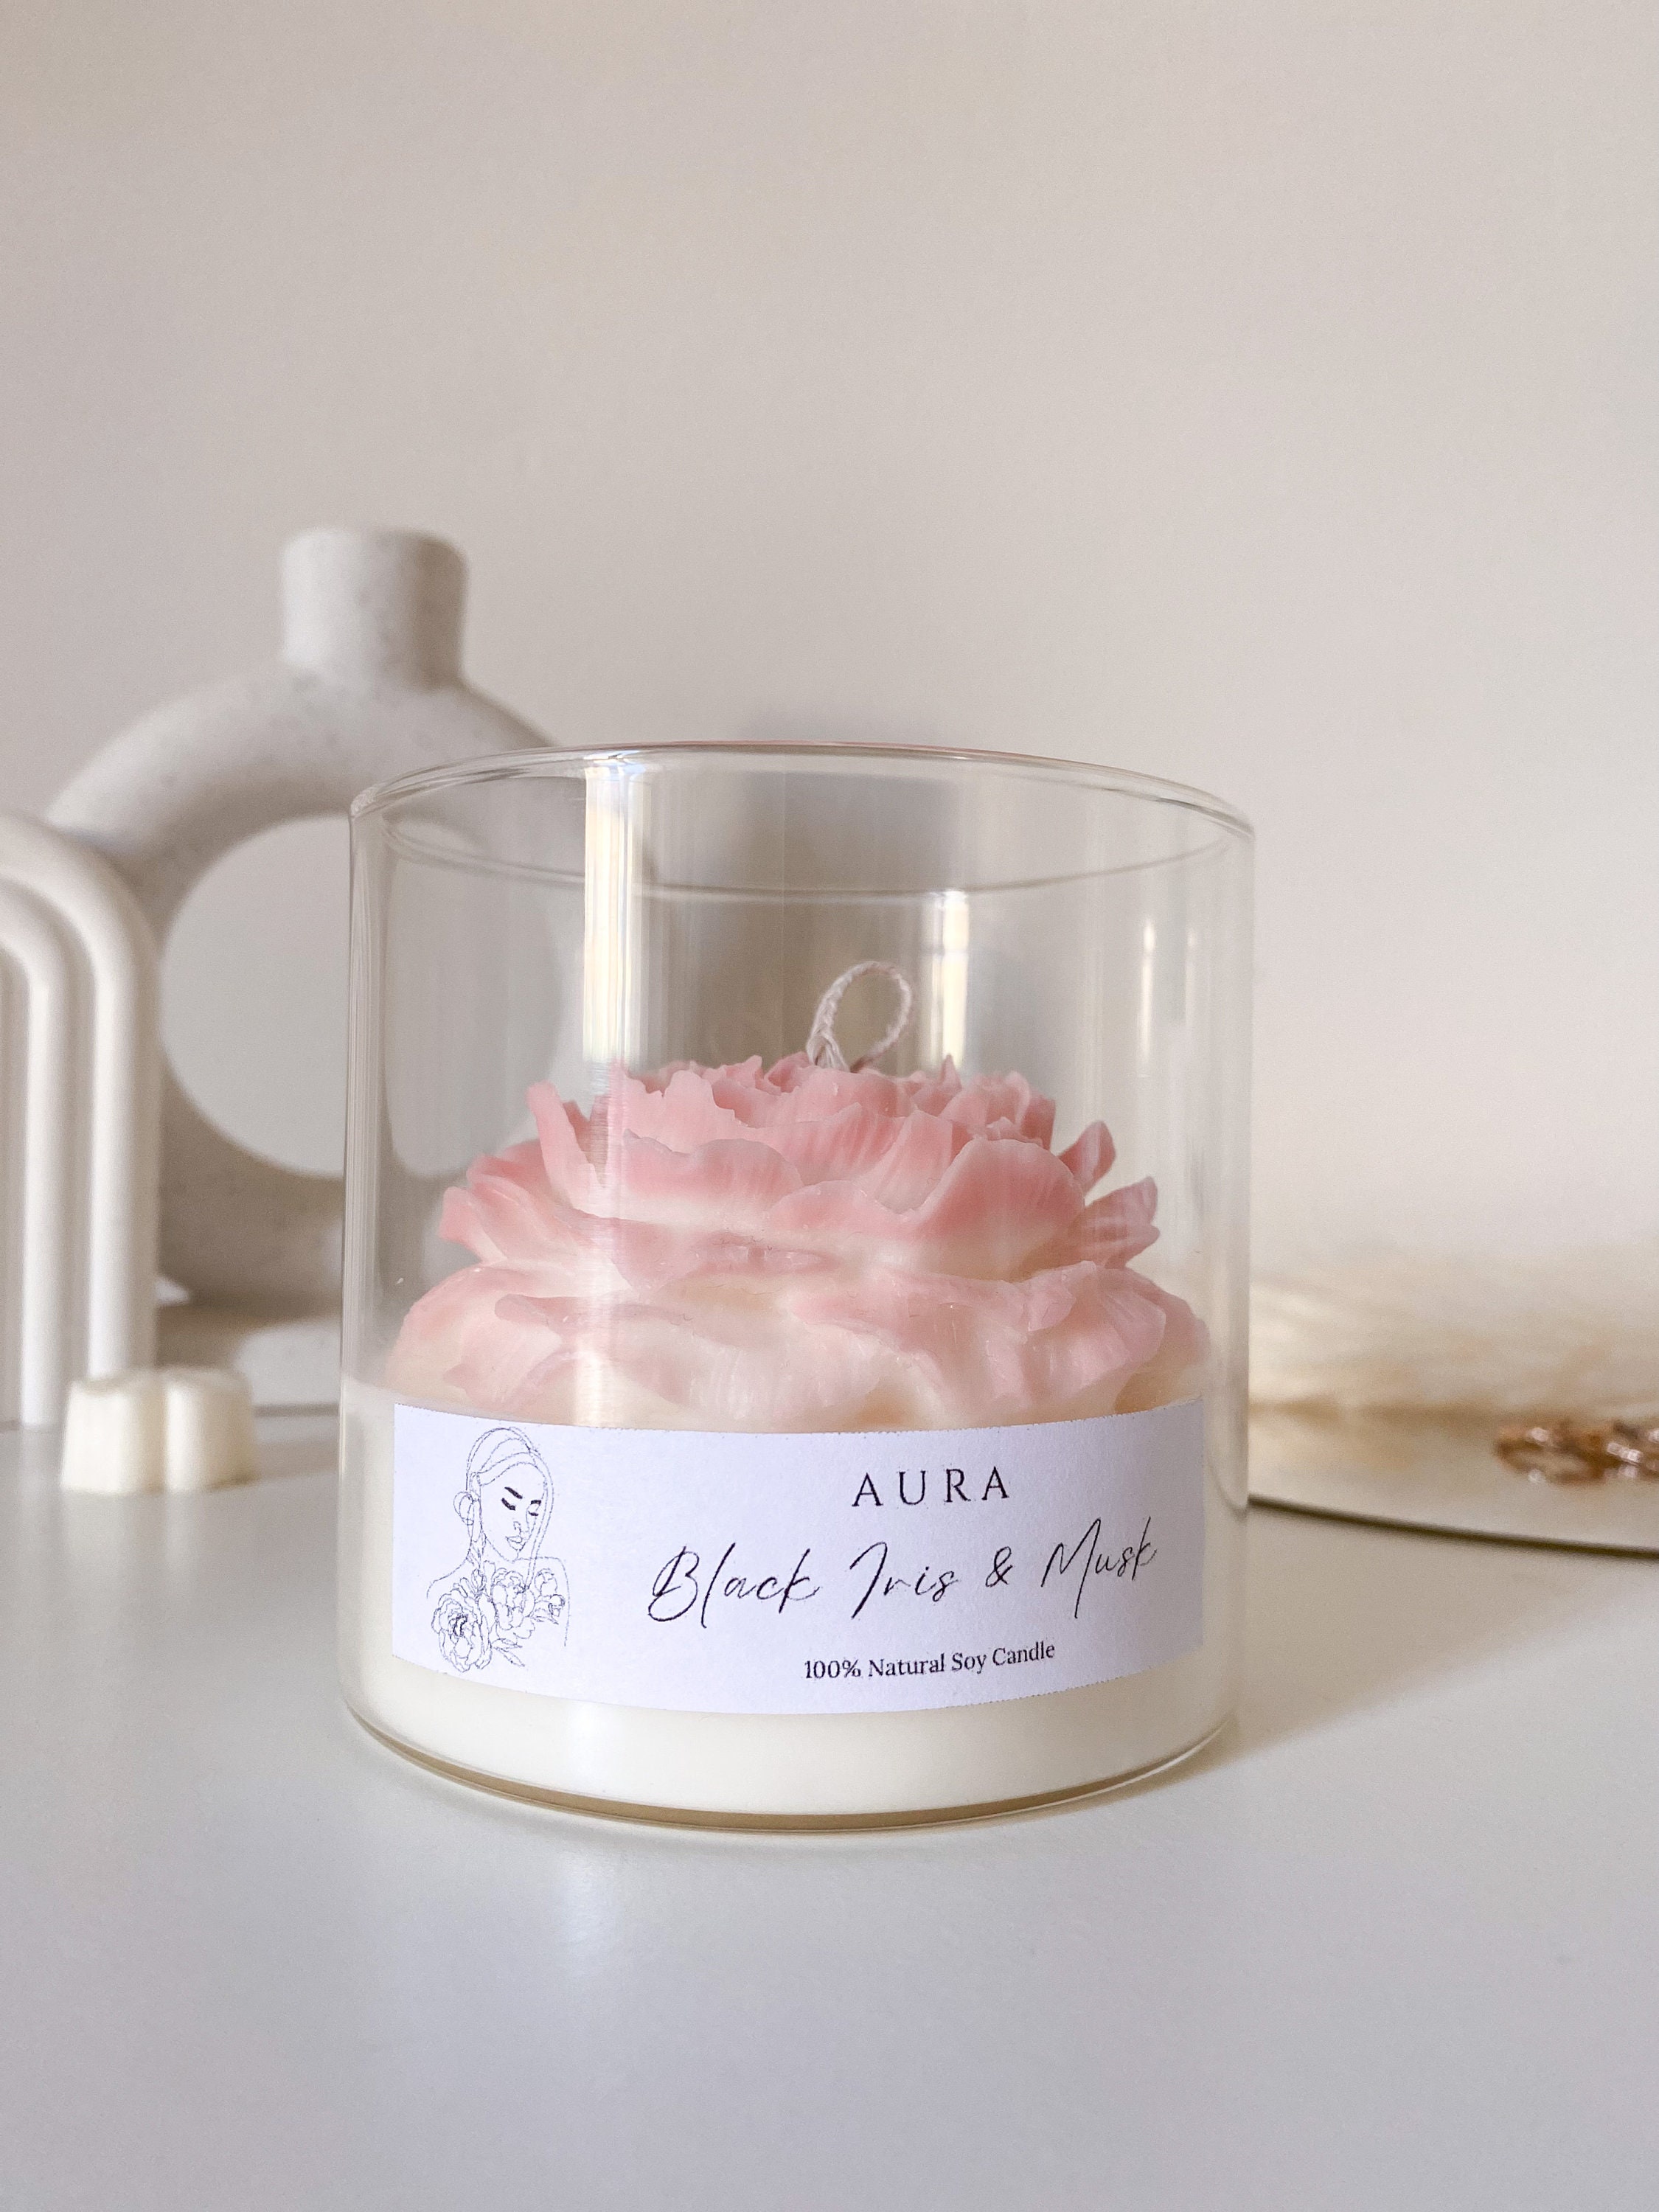 ROSE TEDDY BEAR CANDLE – Artisan Luxx Candle